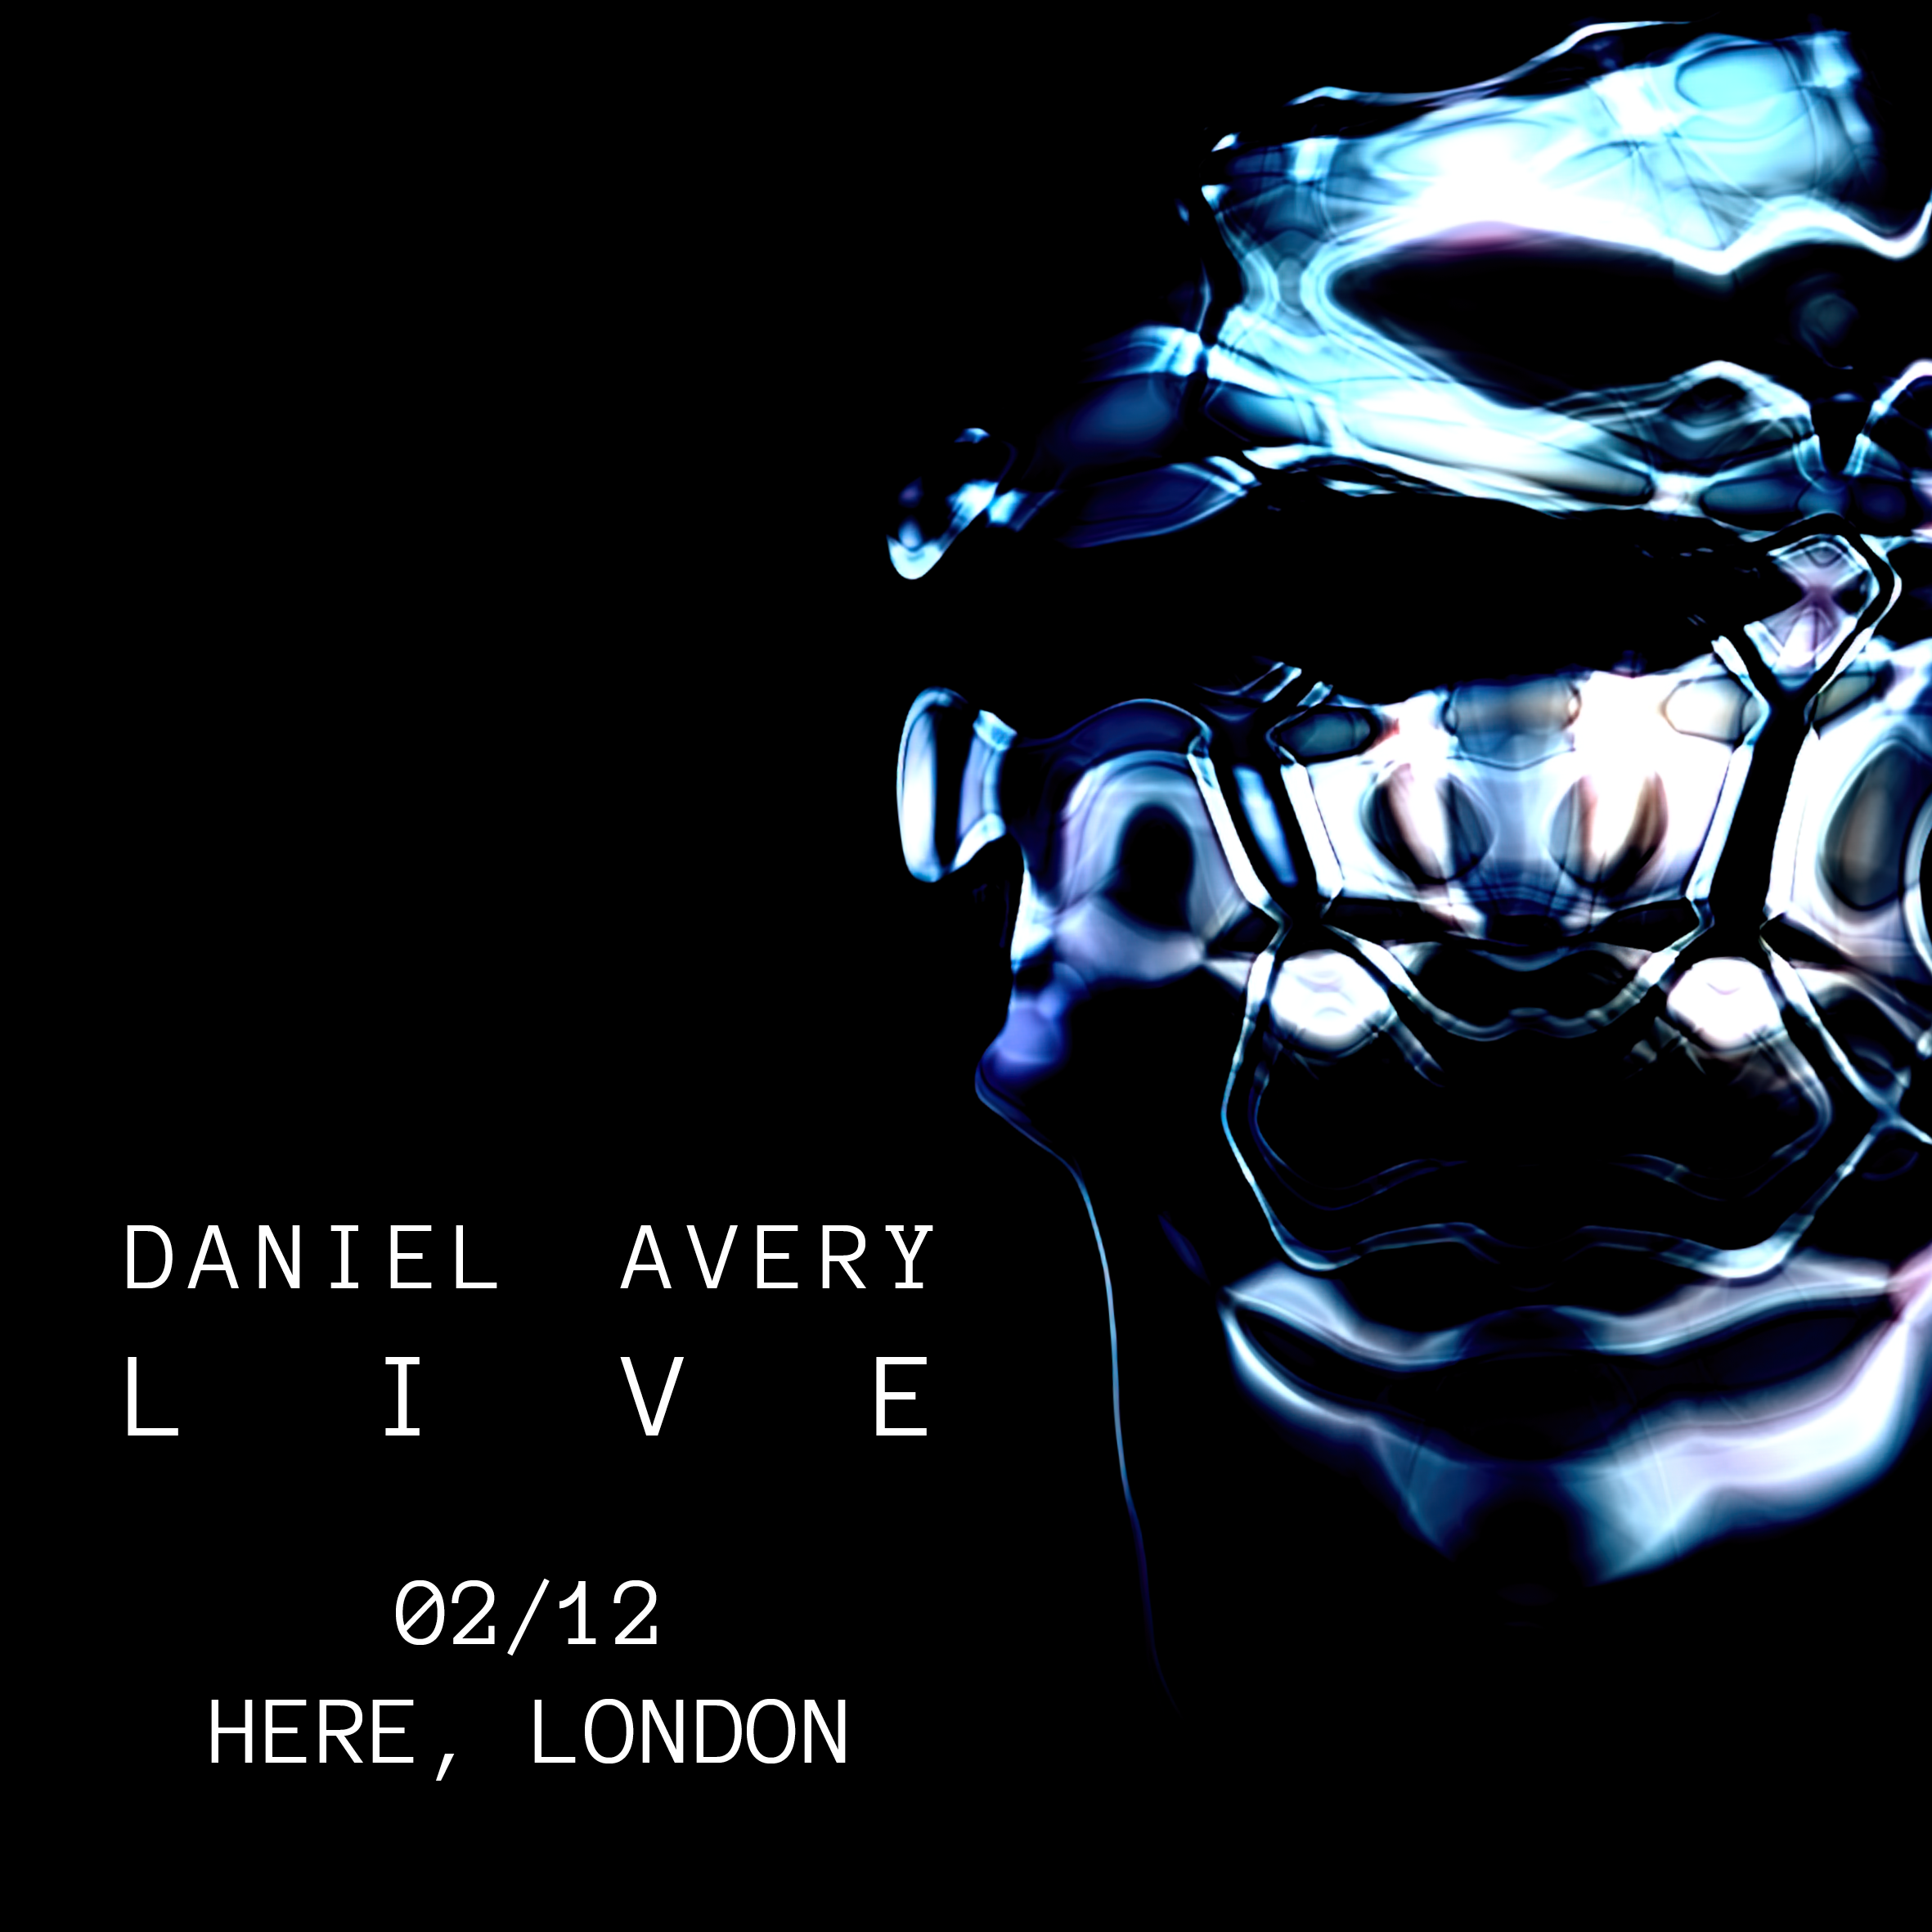 [SOLD OUT] Daniel Avery Live - Página frontal